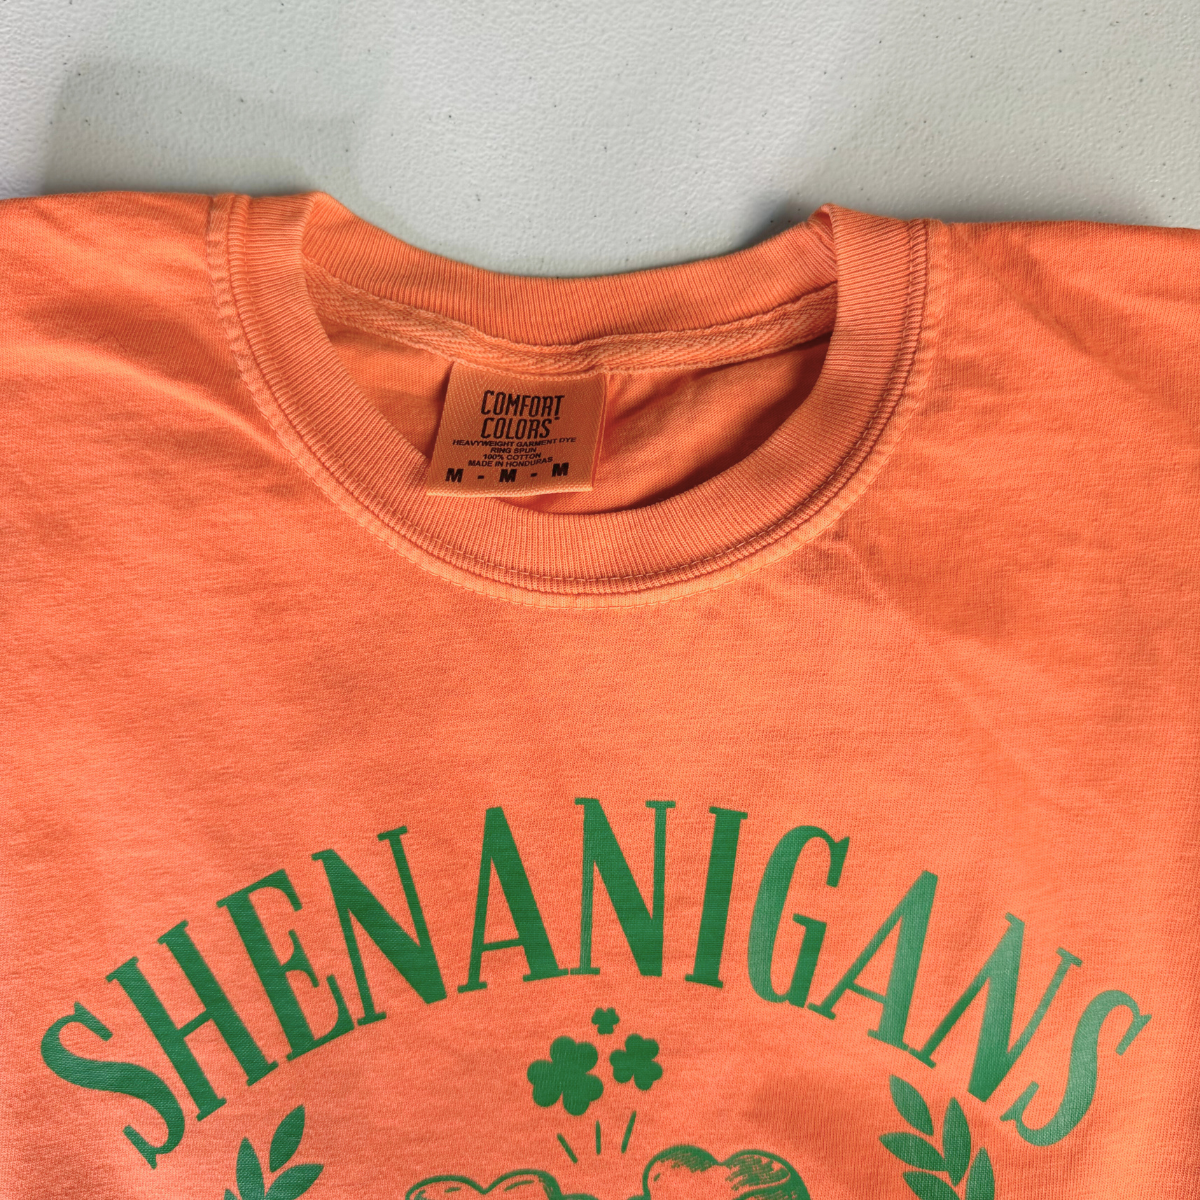 Shenanigans St Patrick's Day Holiday Tee